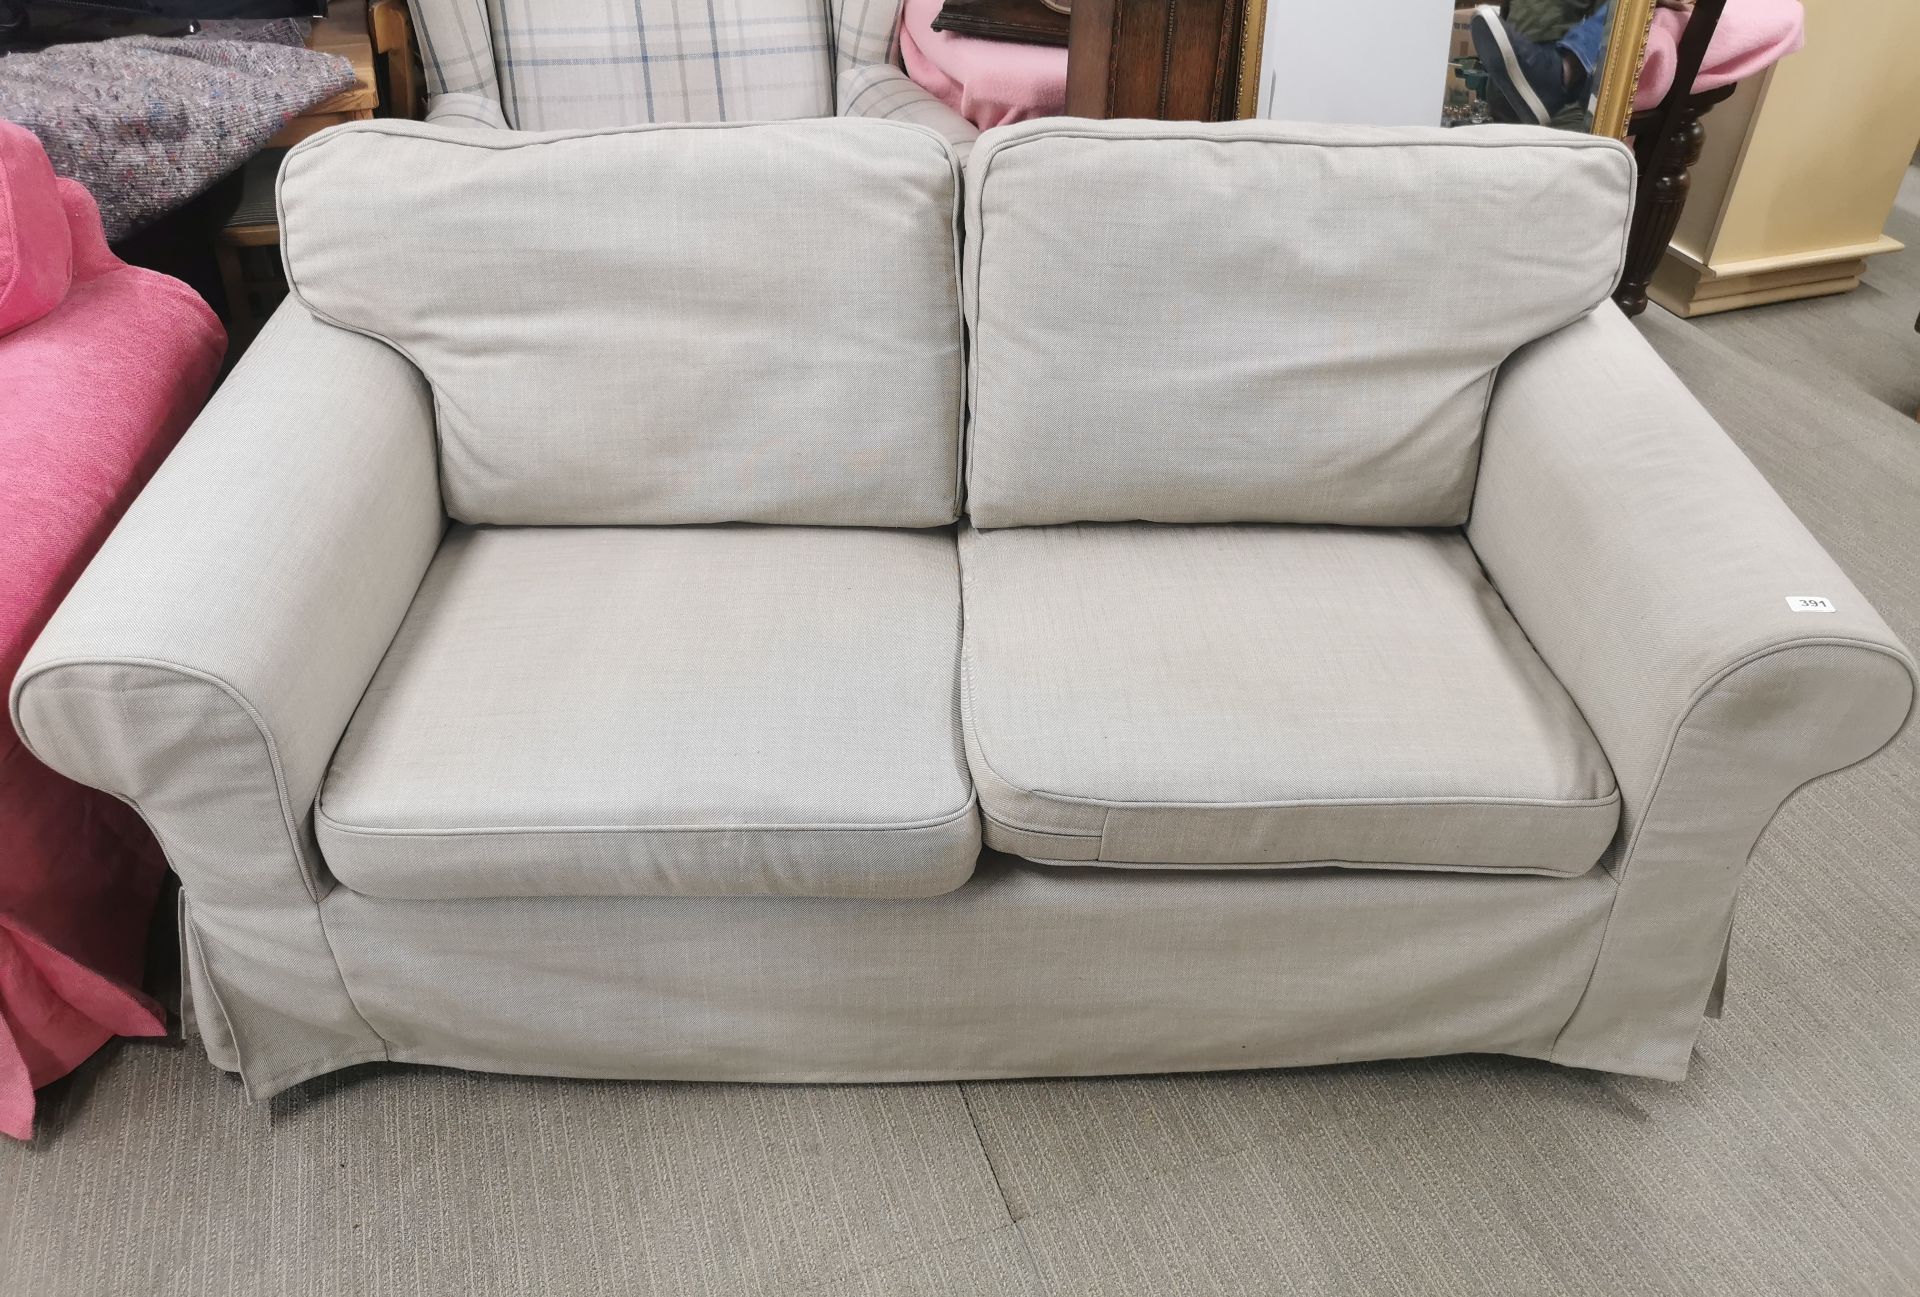 A three seater settee together with a matching two seater settee, with an extra cover to match the - Image 2 of 3